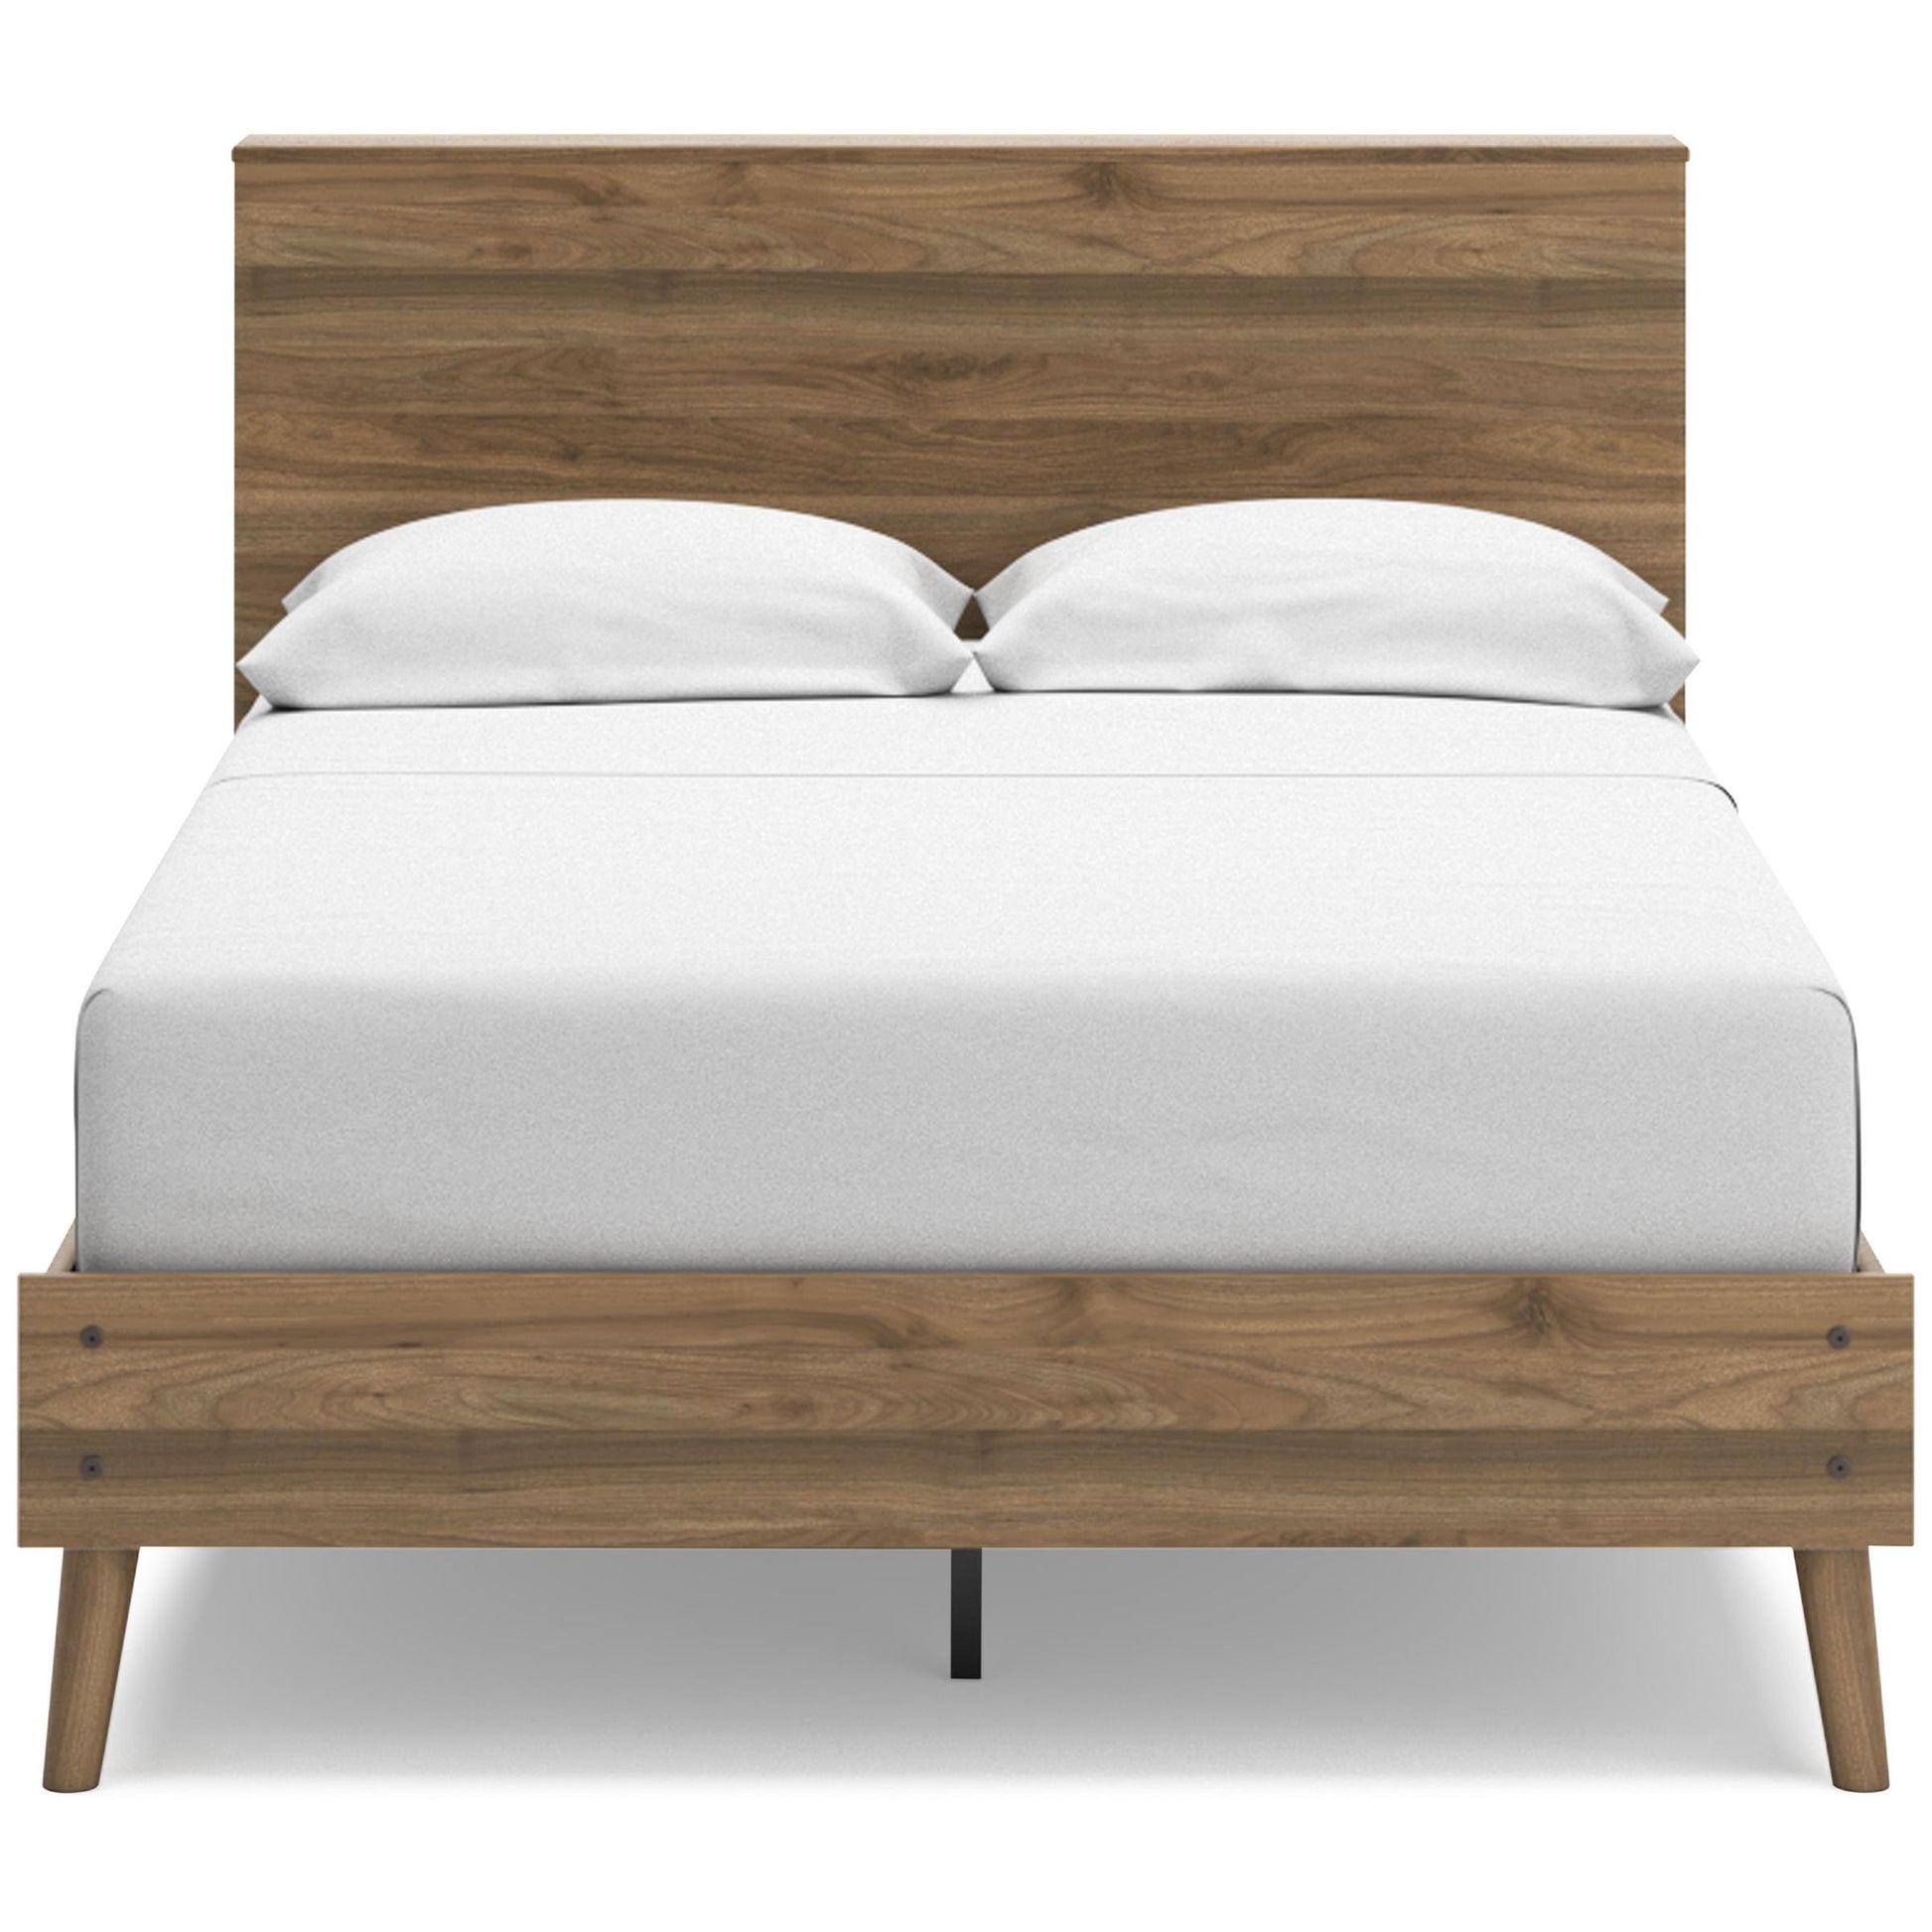 Signature Design by Ashley Kids Beds Bed EB1187-164/EB1187-112 IMAGE 2